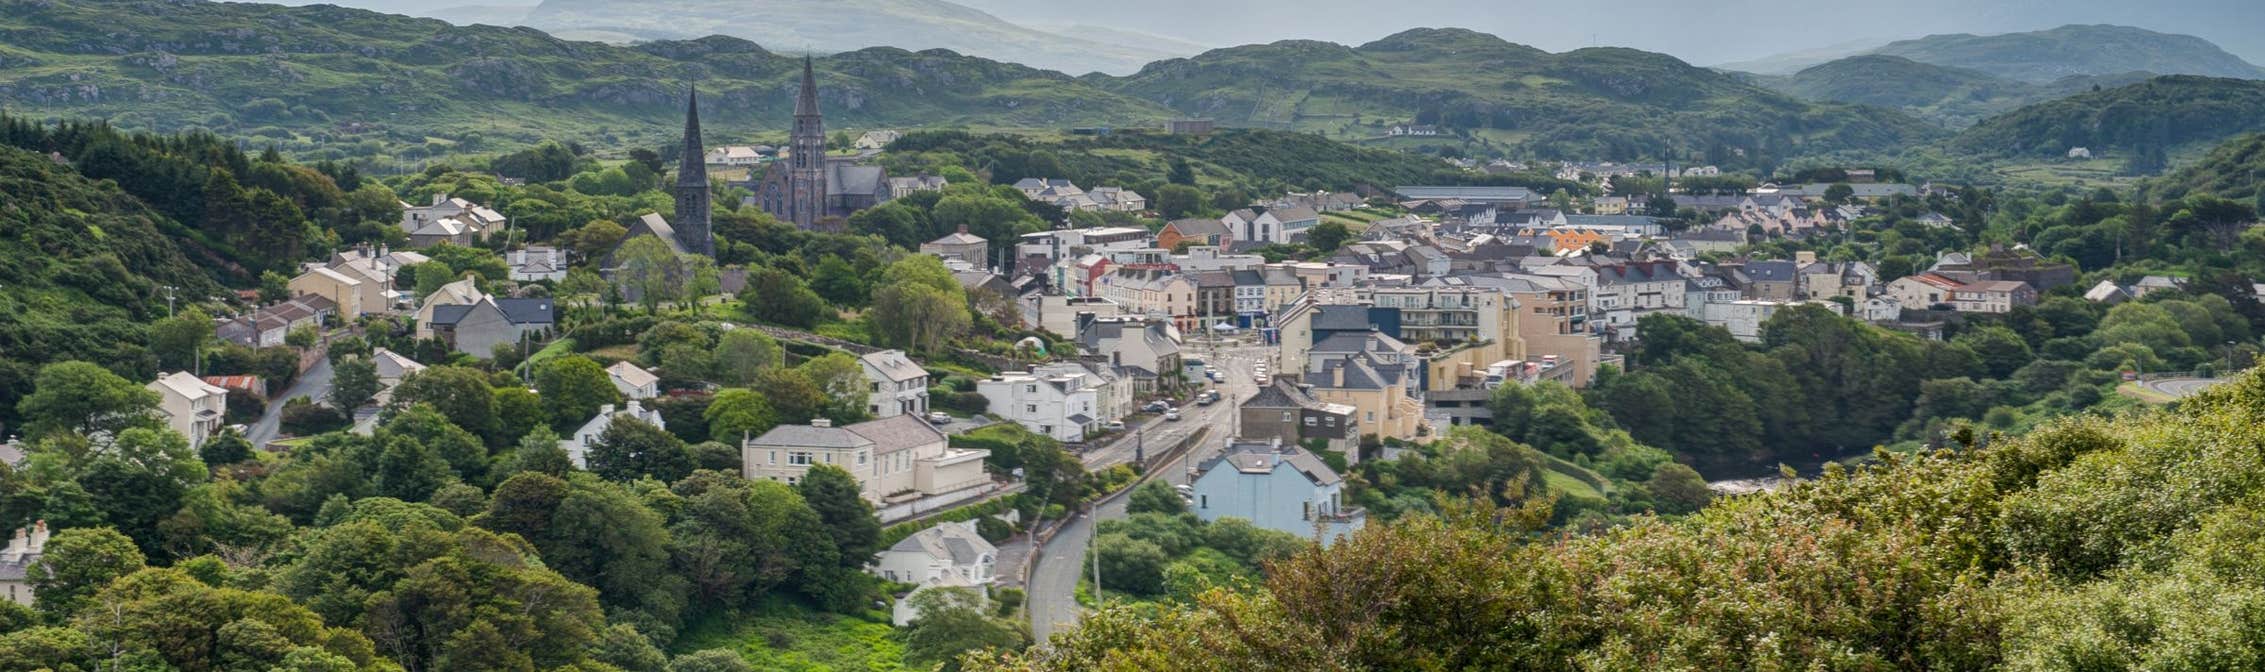 Image of Clifden in County Galway